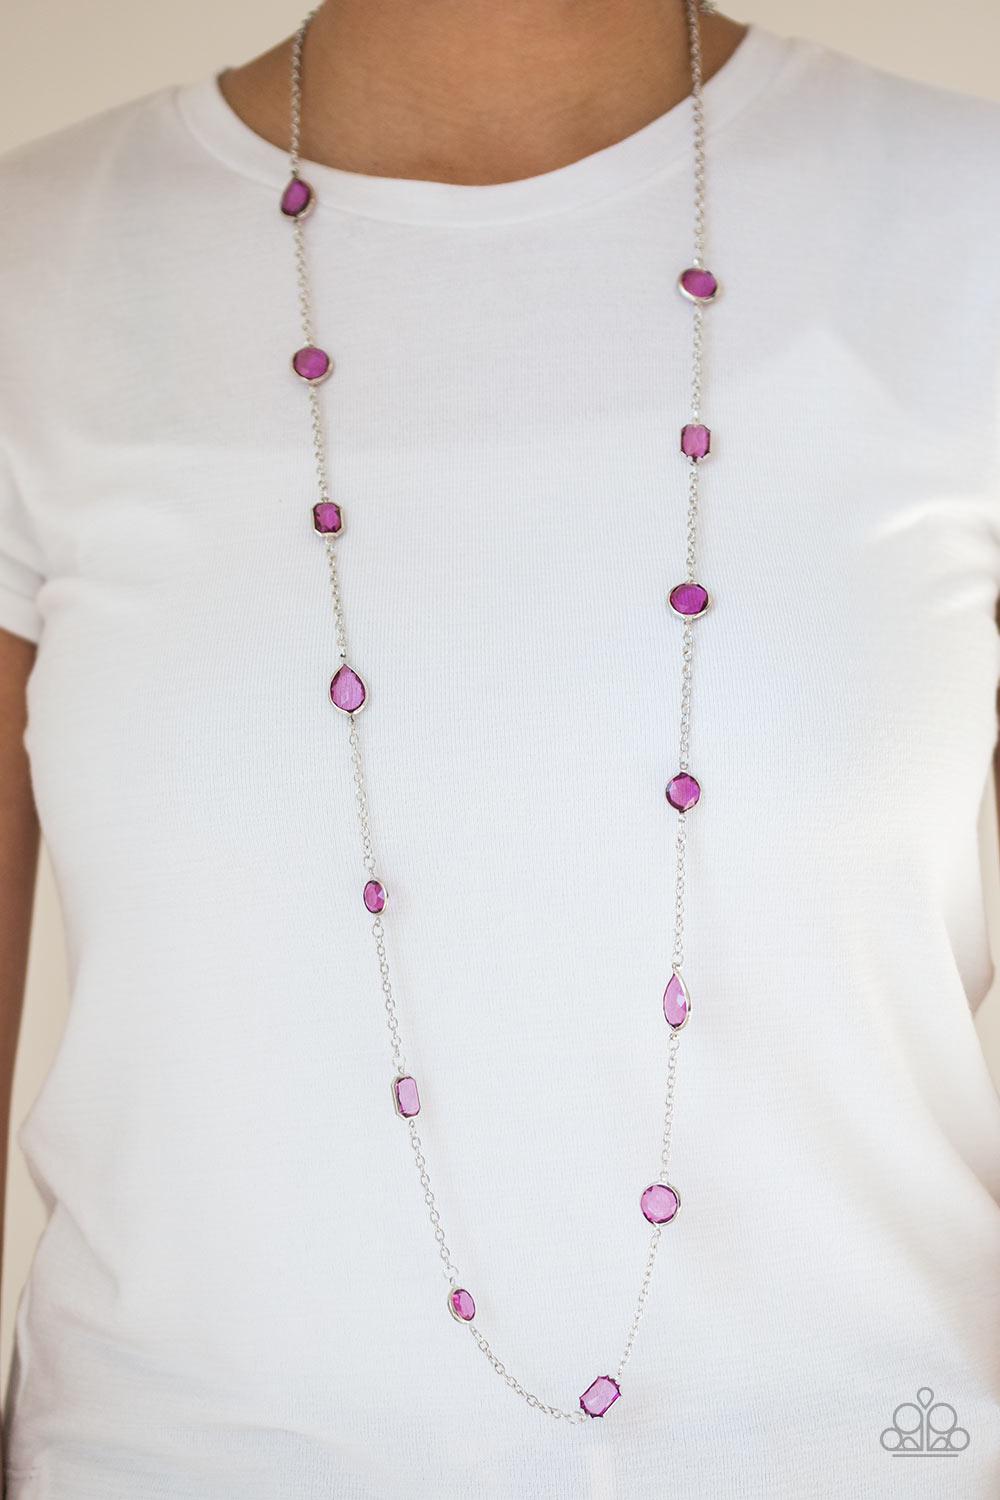 Glassy Glamorous Purple and Silver Necklace - Paparazzi Accessories - lightbox -CarasShop.com - $5 Jewelry by Cara Jewels